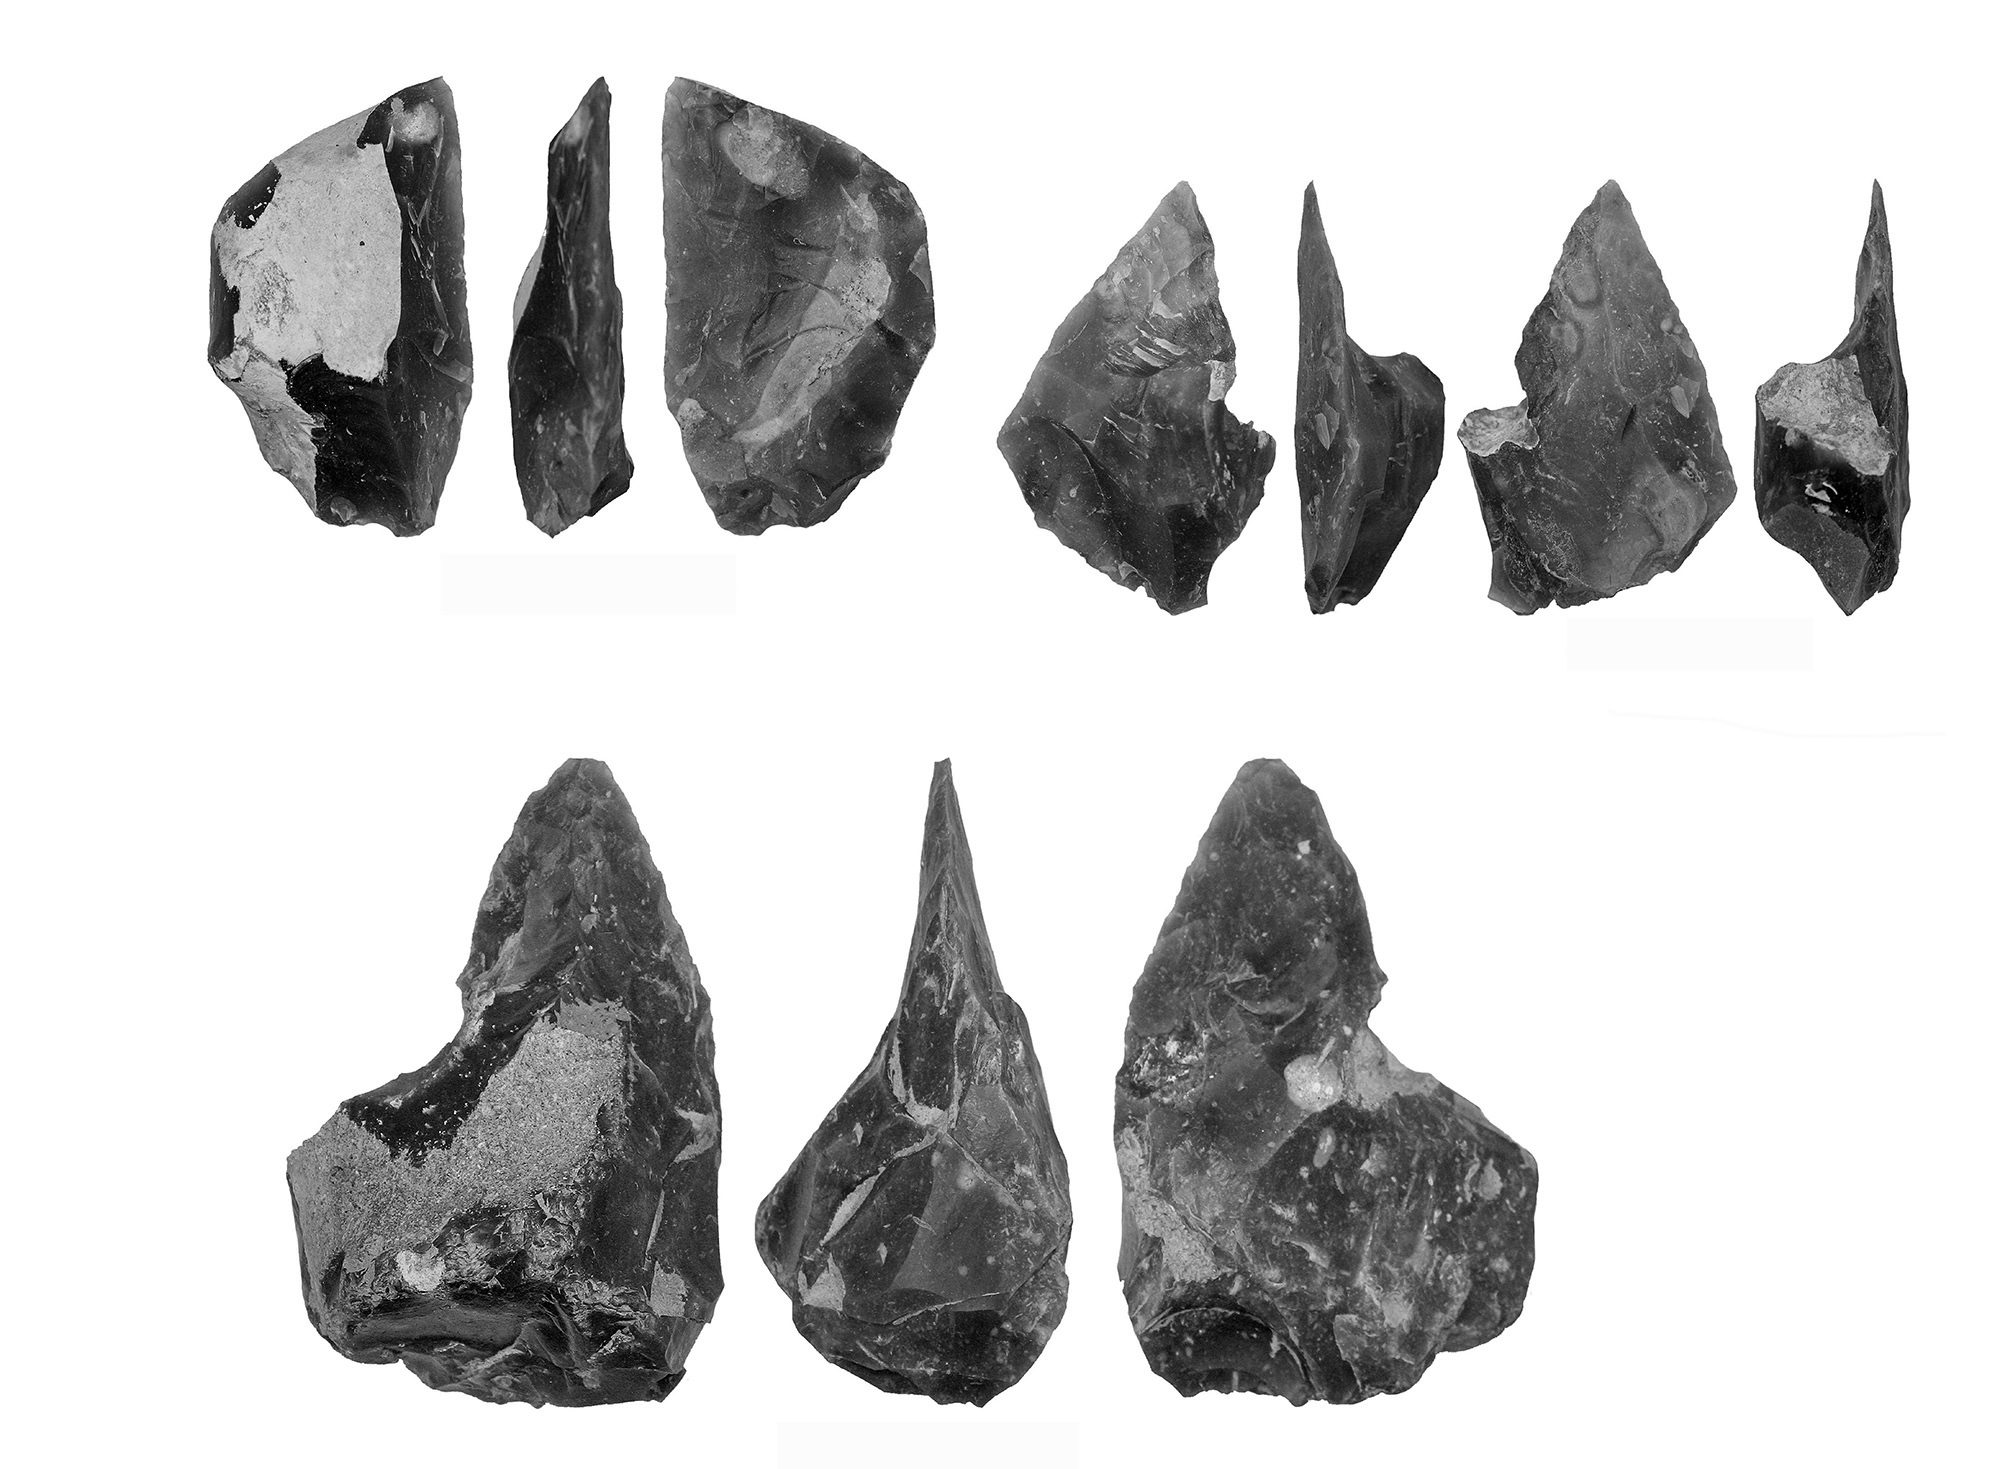 Read more about the article Boffins Find Ice Age Workshop With 17,000 Flint Knives